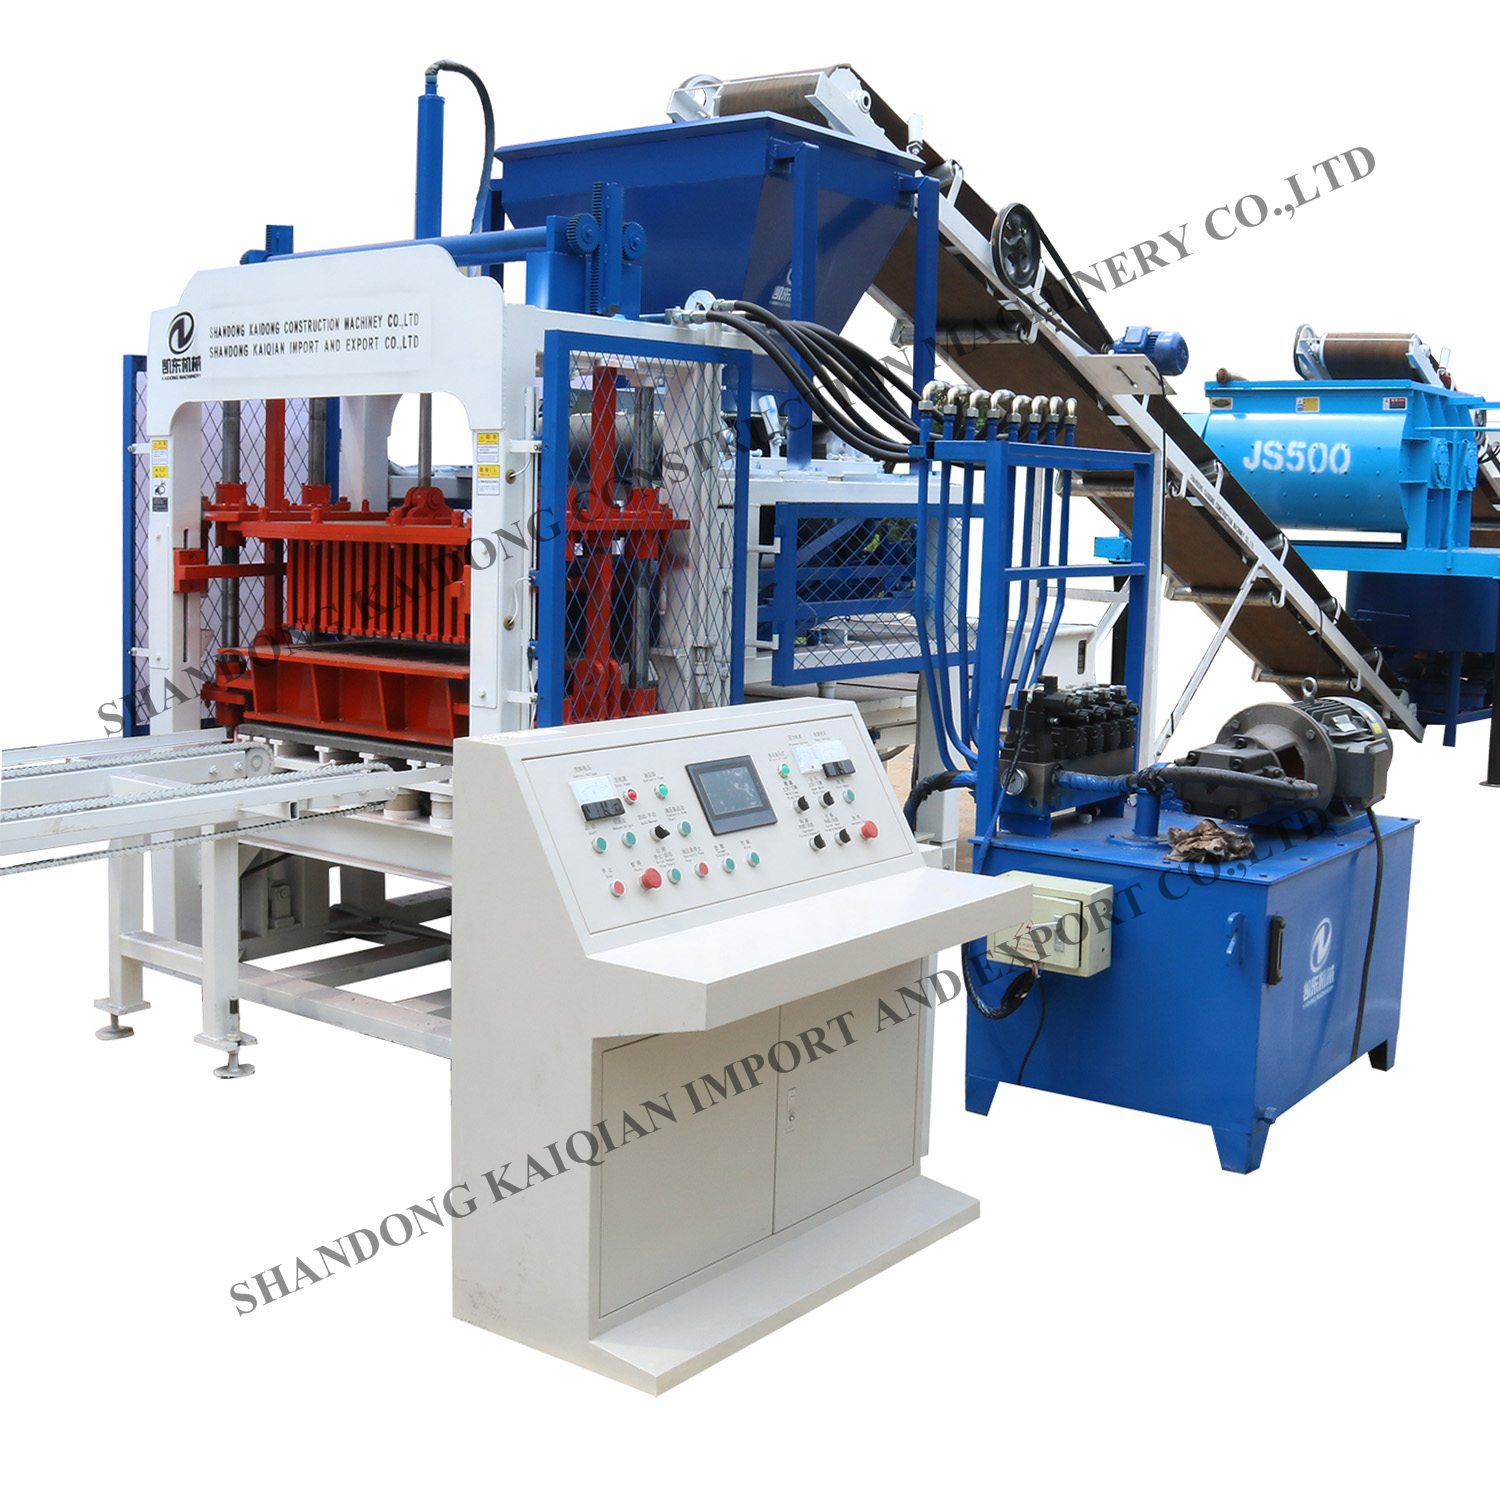 Hydraulic Press Fully Automatic clc brick making machineHollow Cement Concrete Block Making Machine Price for Sale